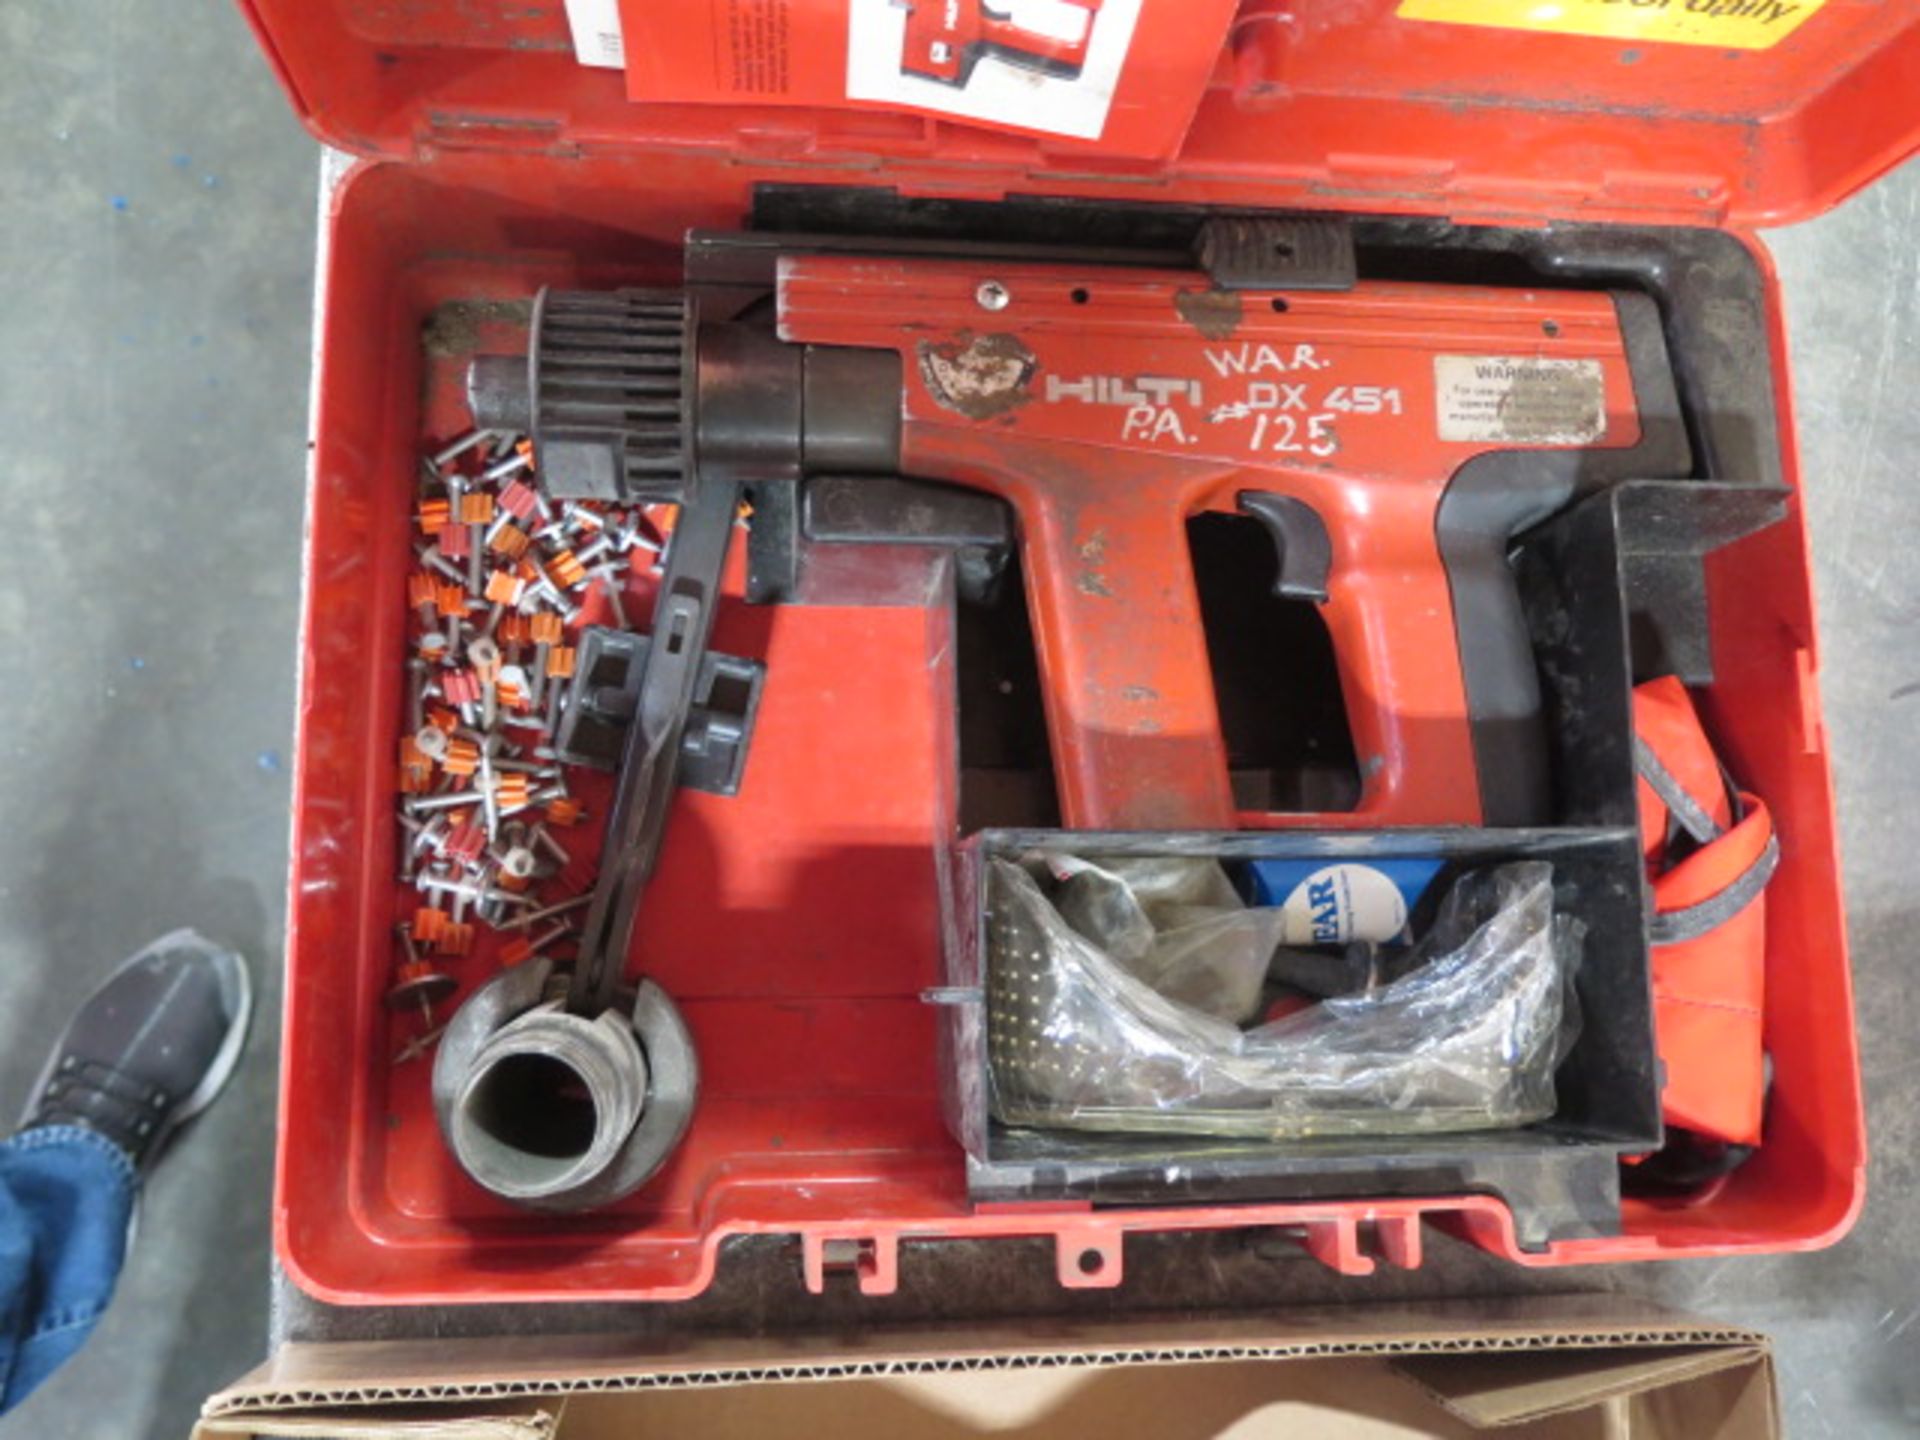 Hilti DX451 Powder Shot Tool (SOLD AS-IS - NO WARRANTY) - Image 2 of 4